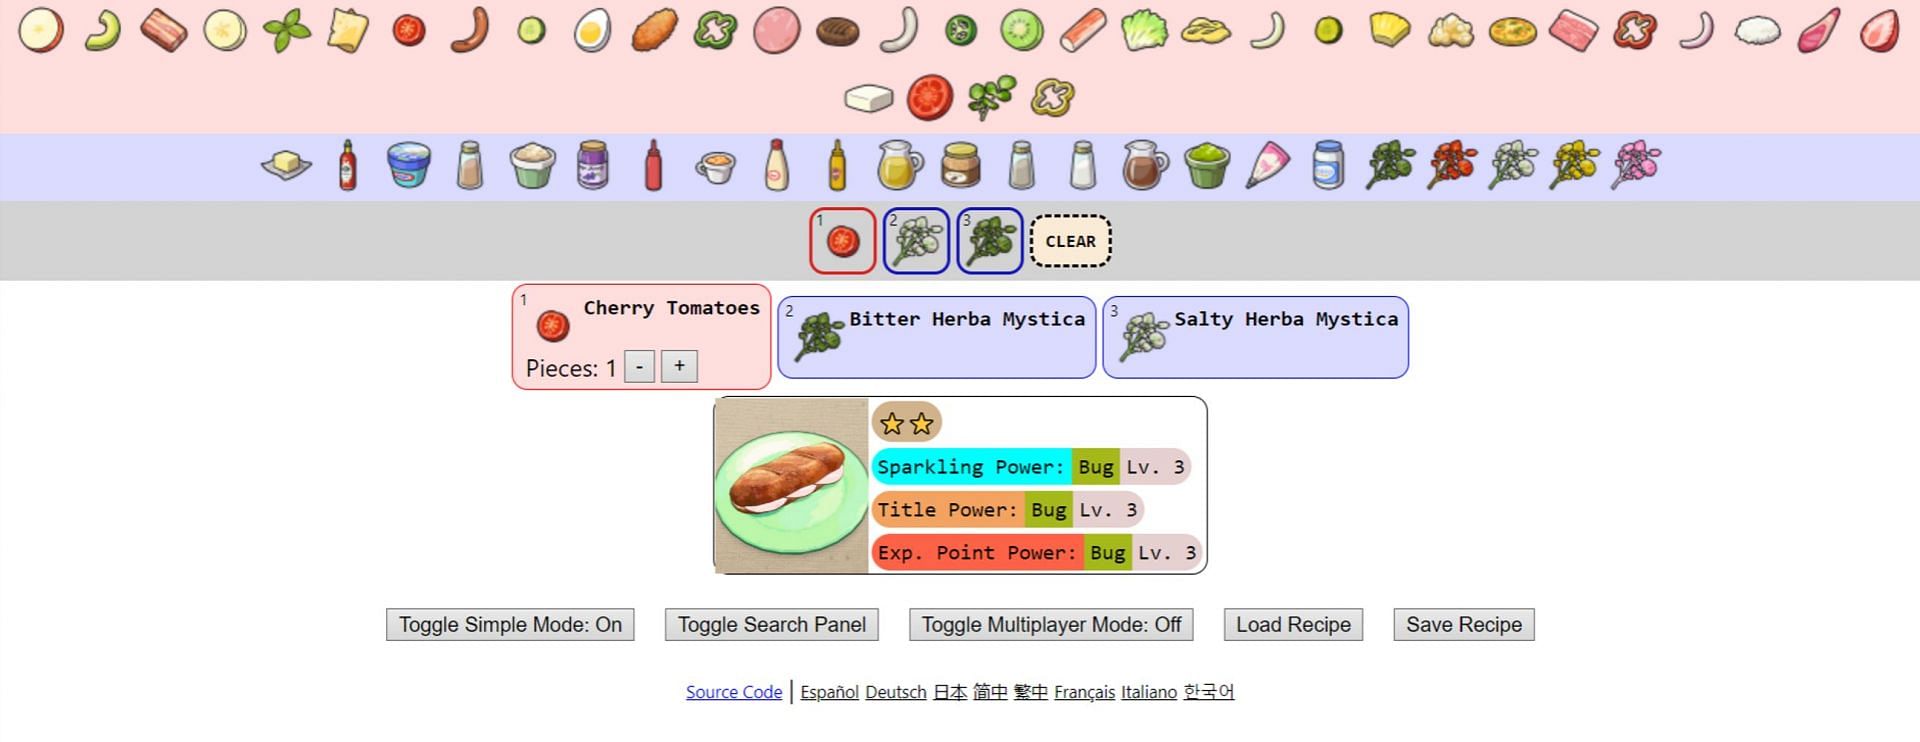 This sandwich simulator proves that the Bug-type combination from the infographic works (Image via cecilbowen.github.io)